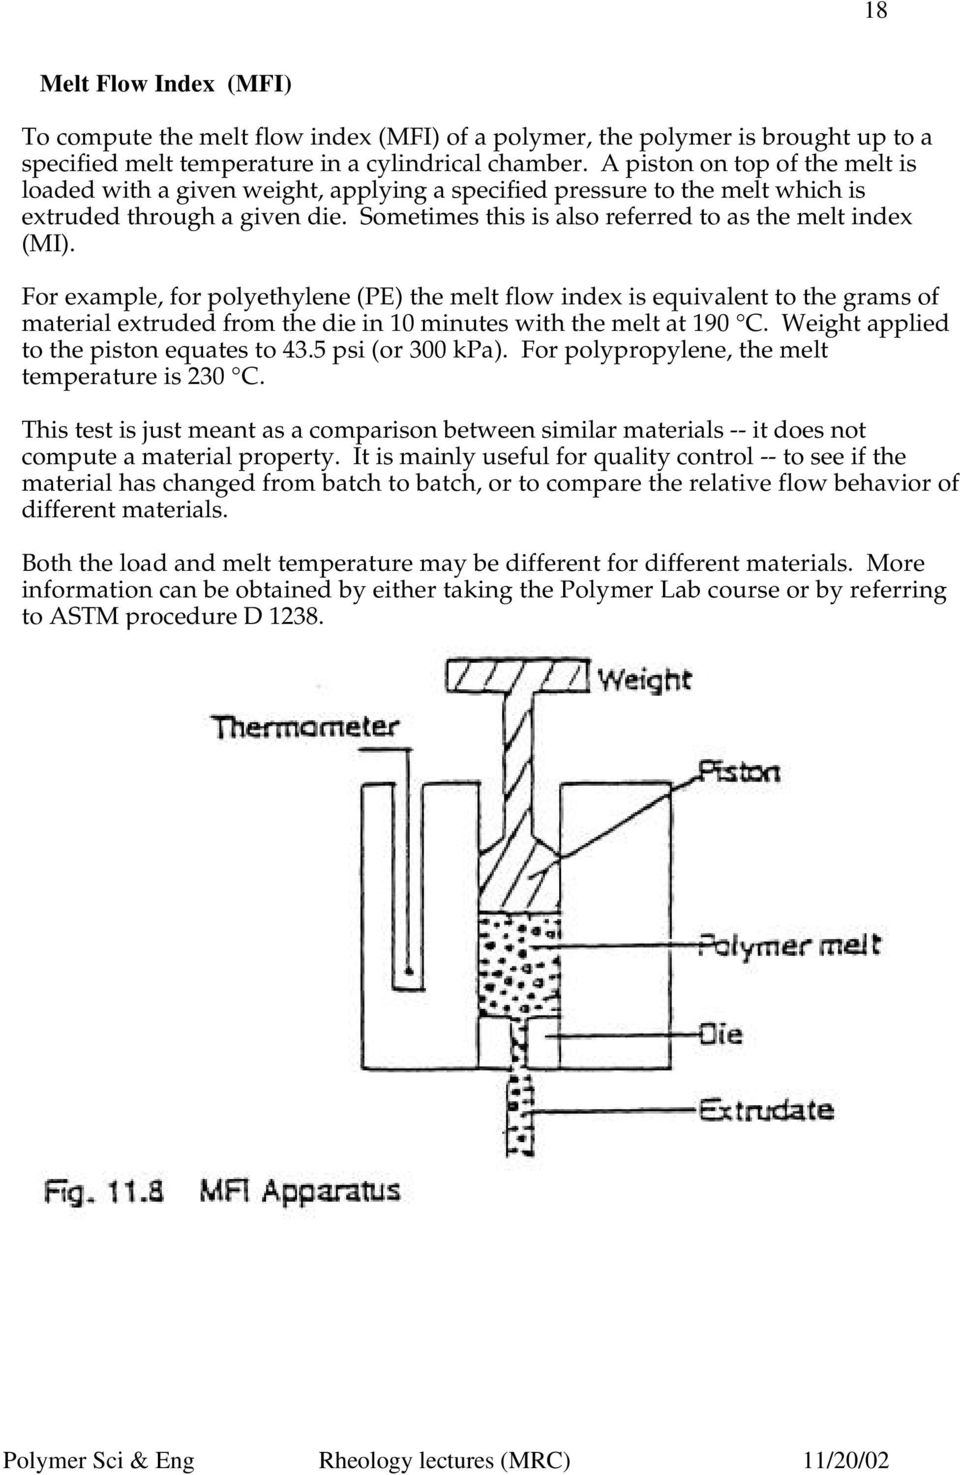 For example, for polyethylene (PE) the melt flow index is equivalent to the grams of material extruded from the die in 10 minutes with the melt at 190 C. Weight applied to the piston equates to 43.